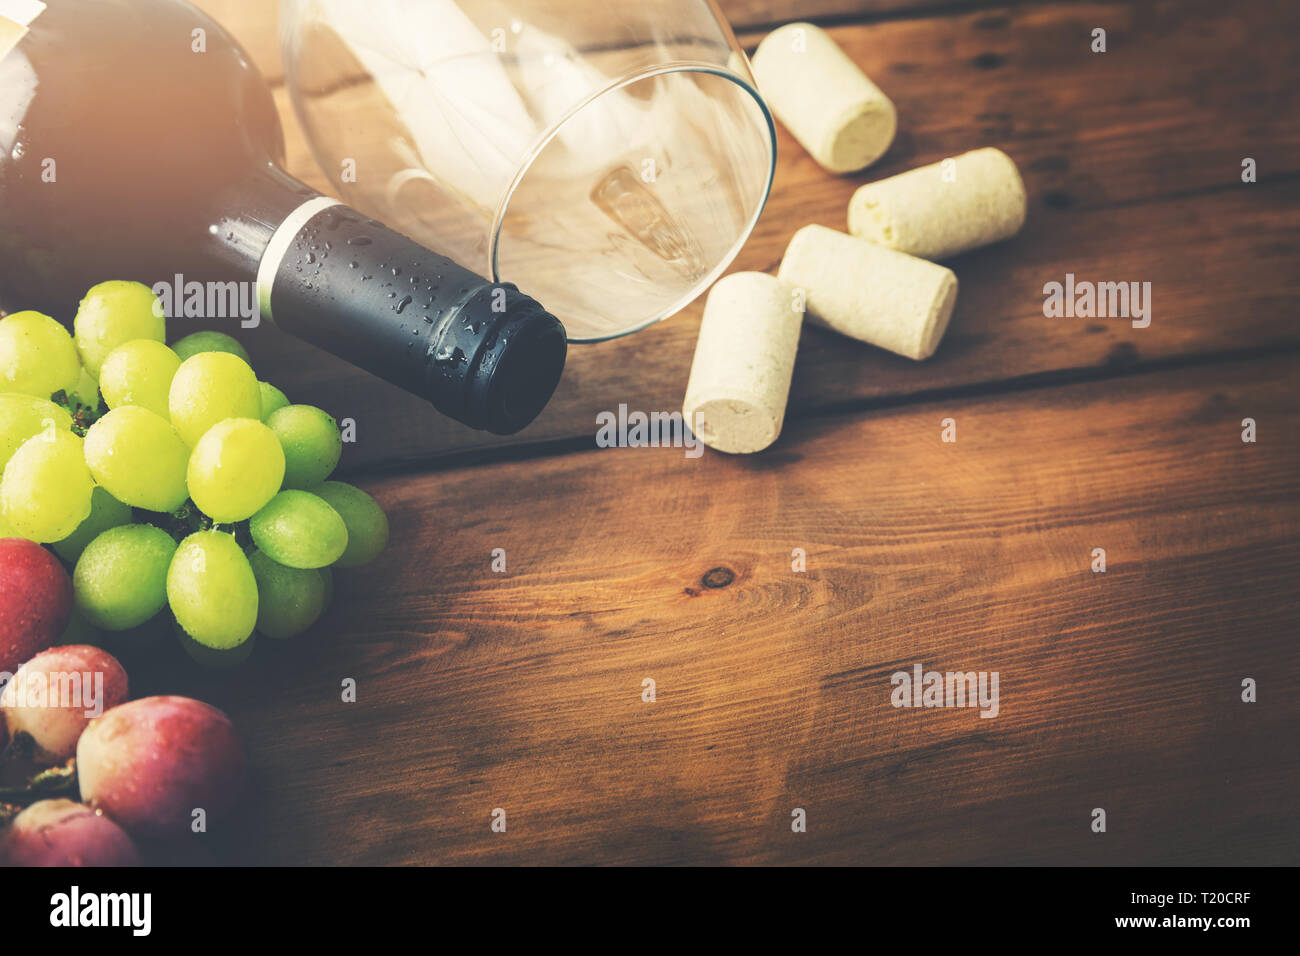 red wine bottle with glass and grapes on wooden background Stock Photo